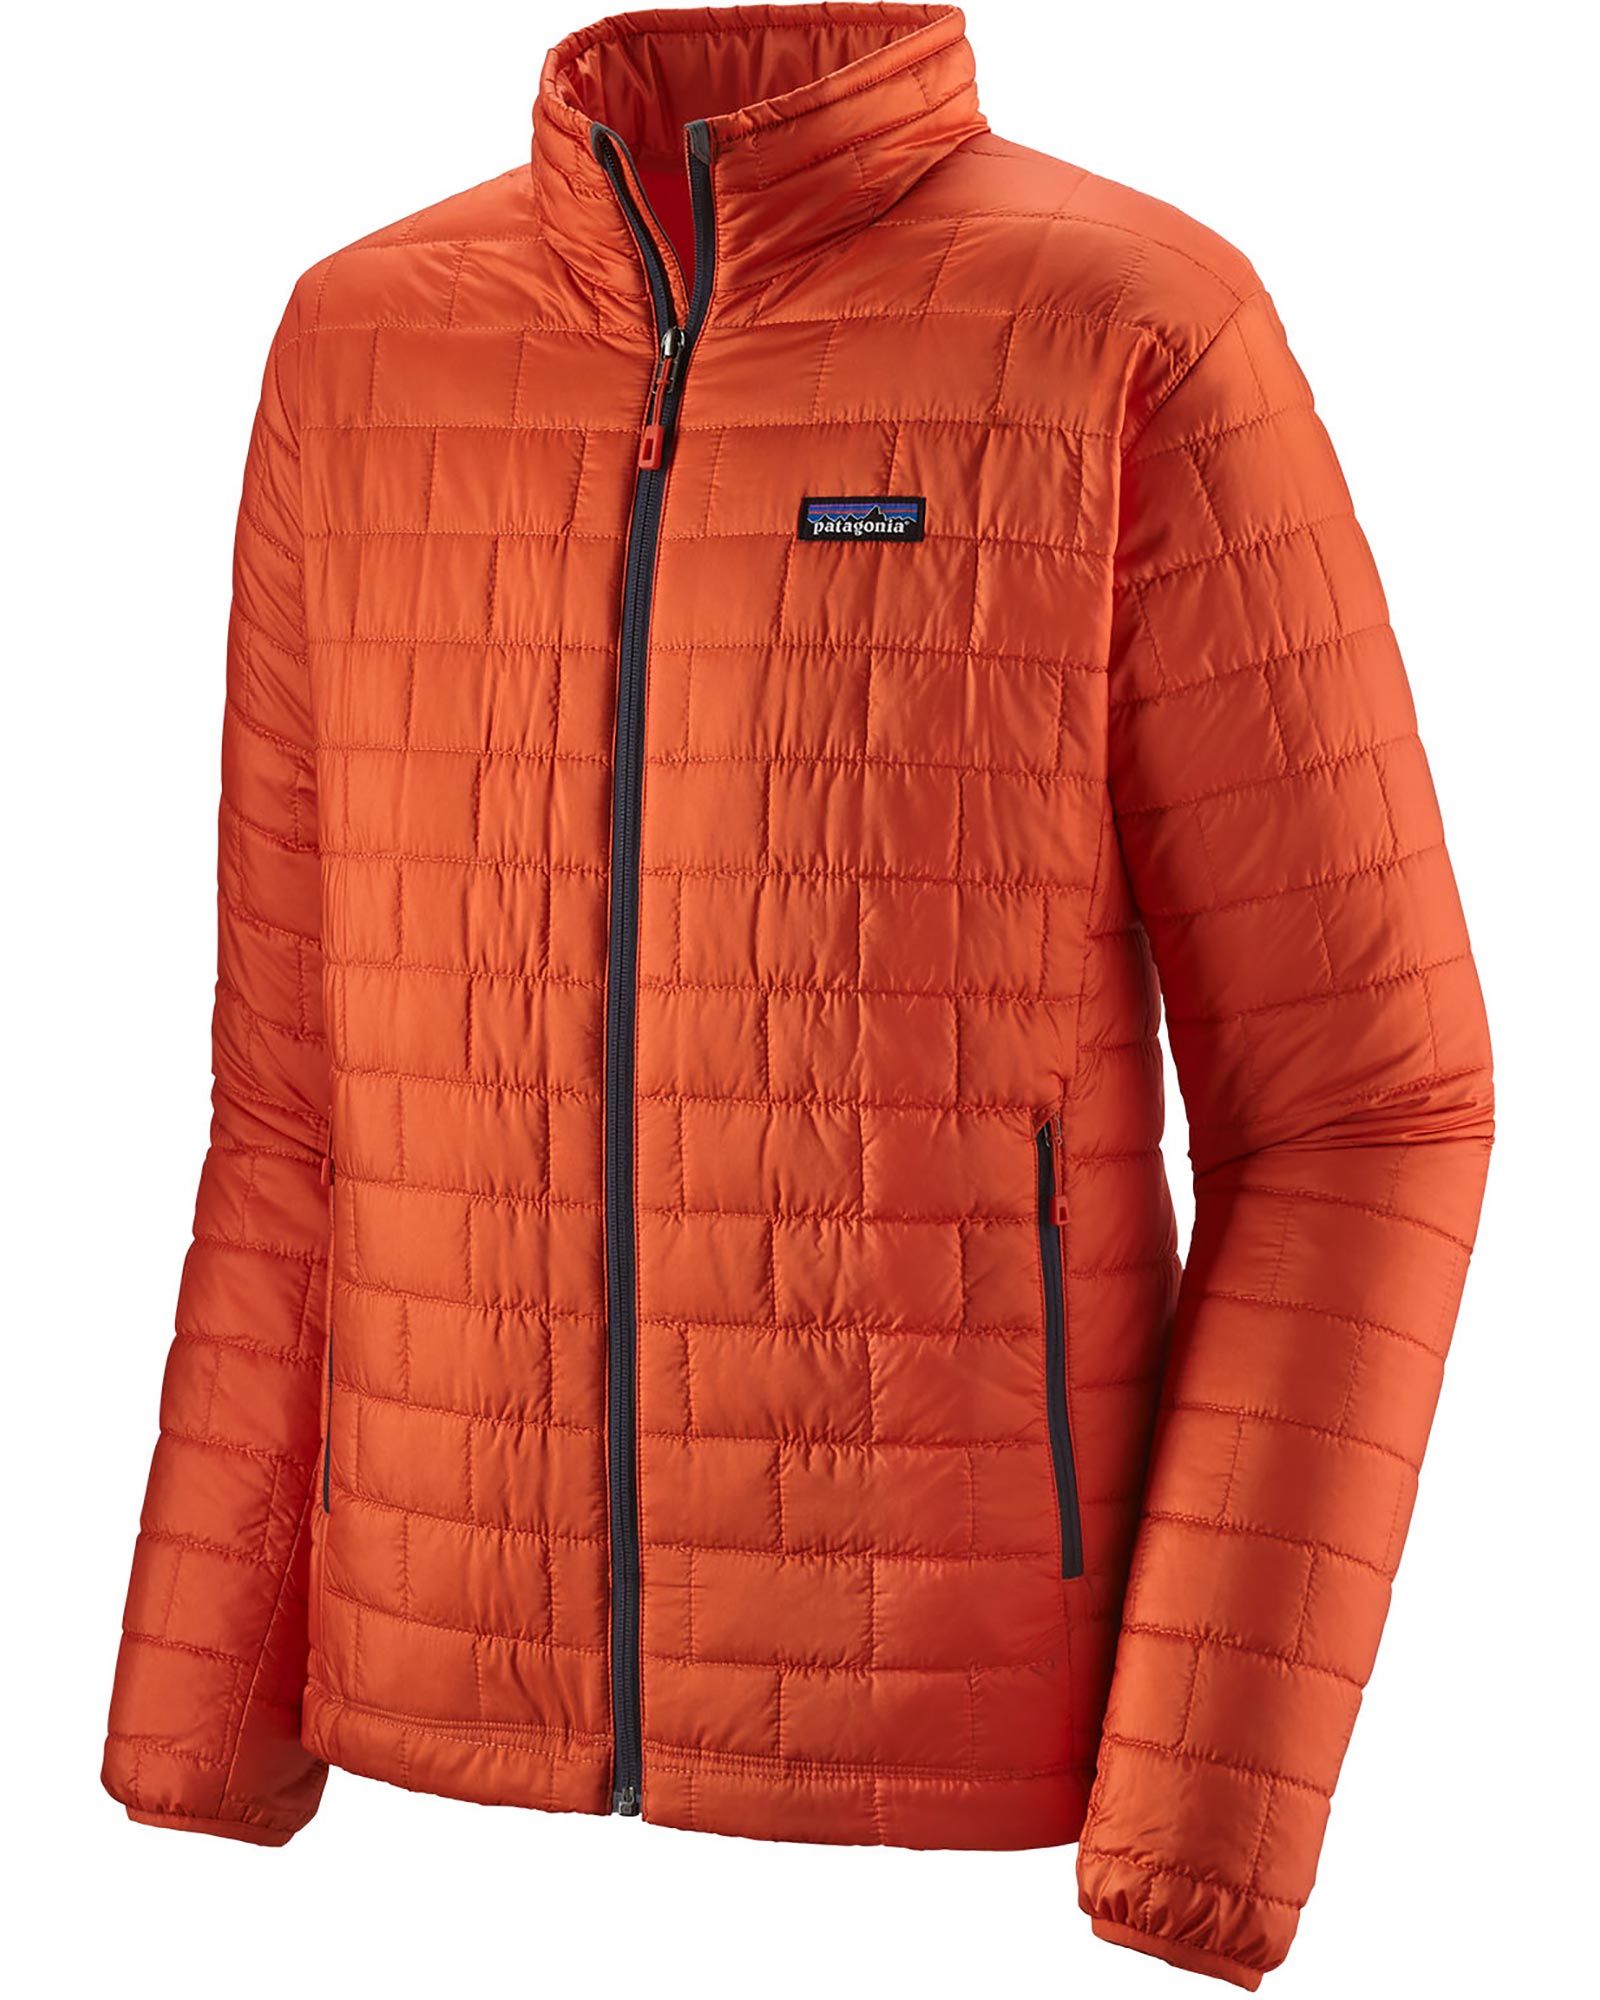 Patagonia Nano Puff Men’s Insulated Jacket - Metric Red S